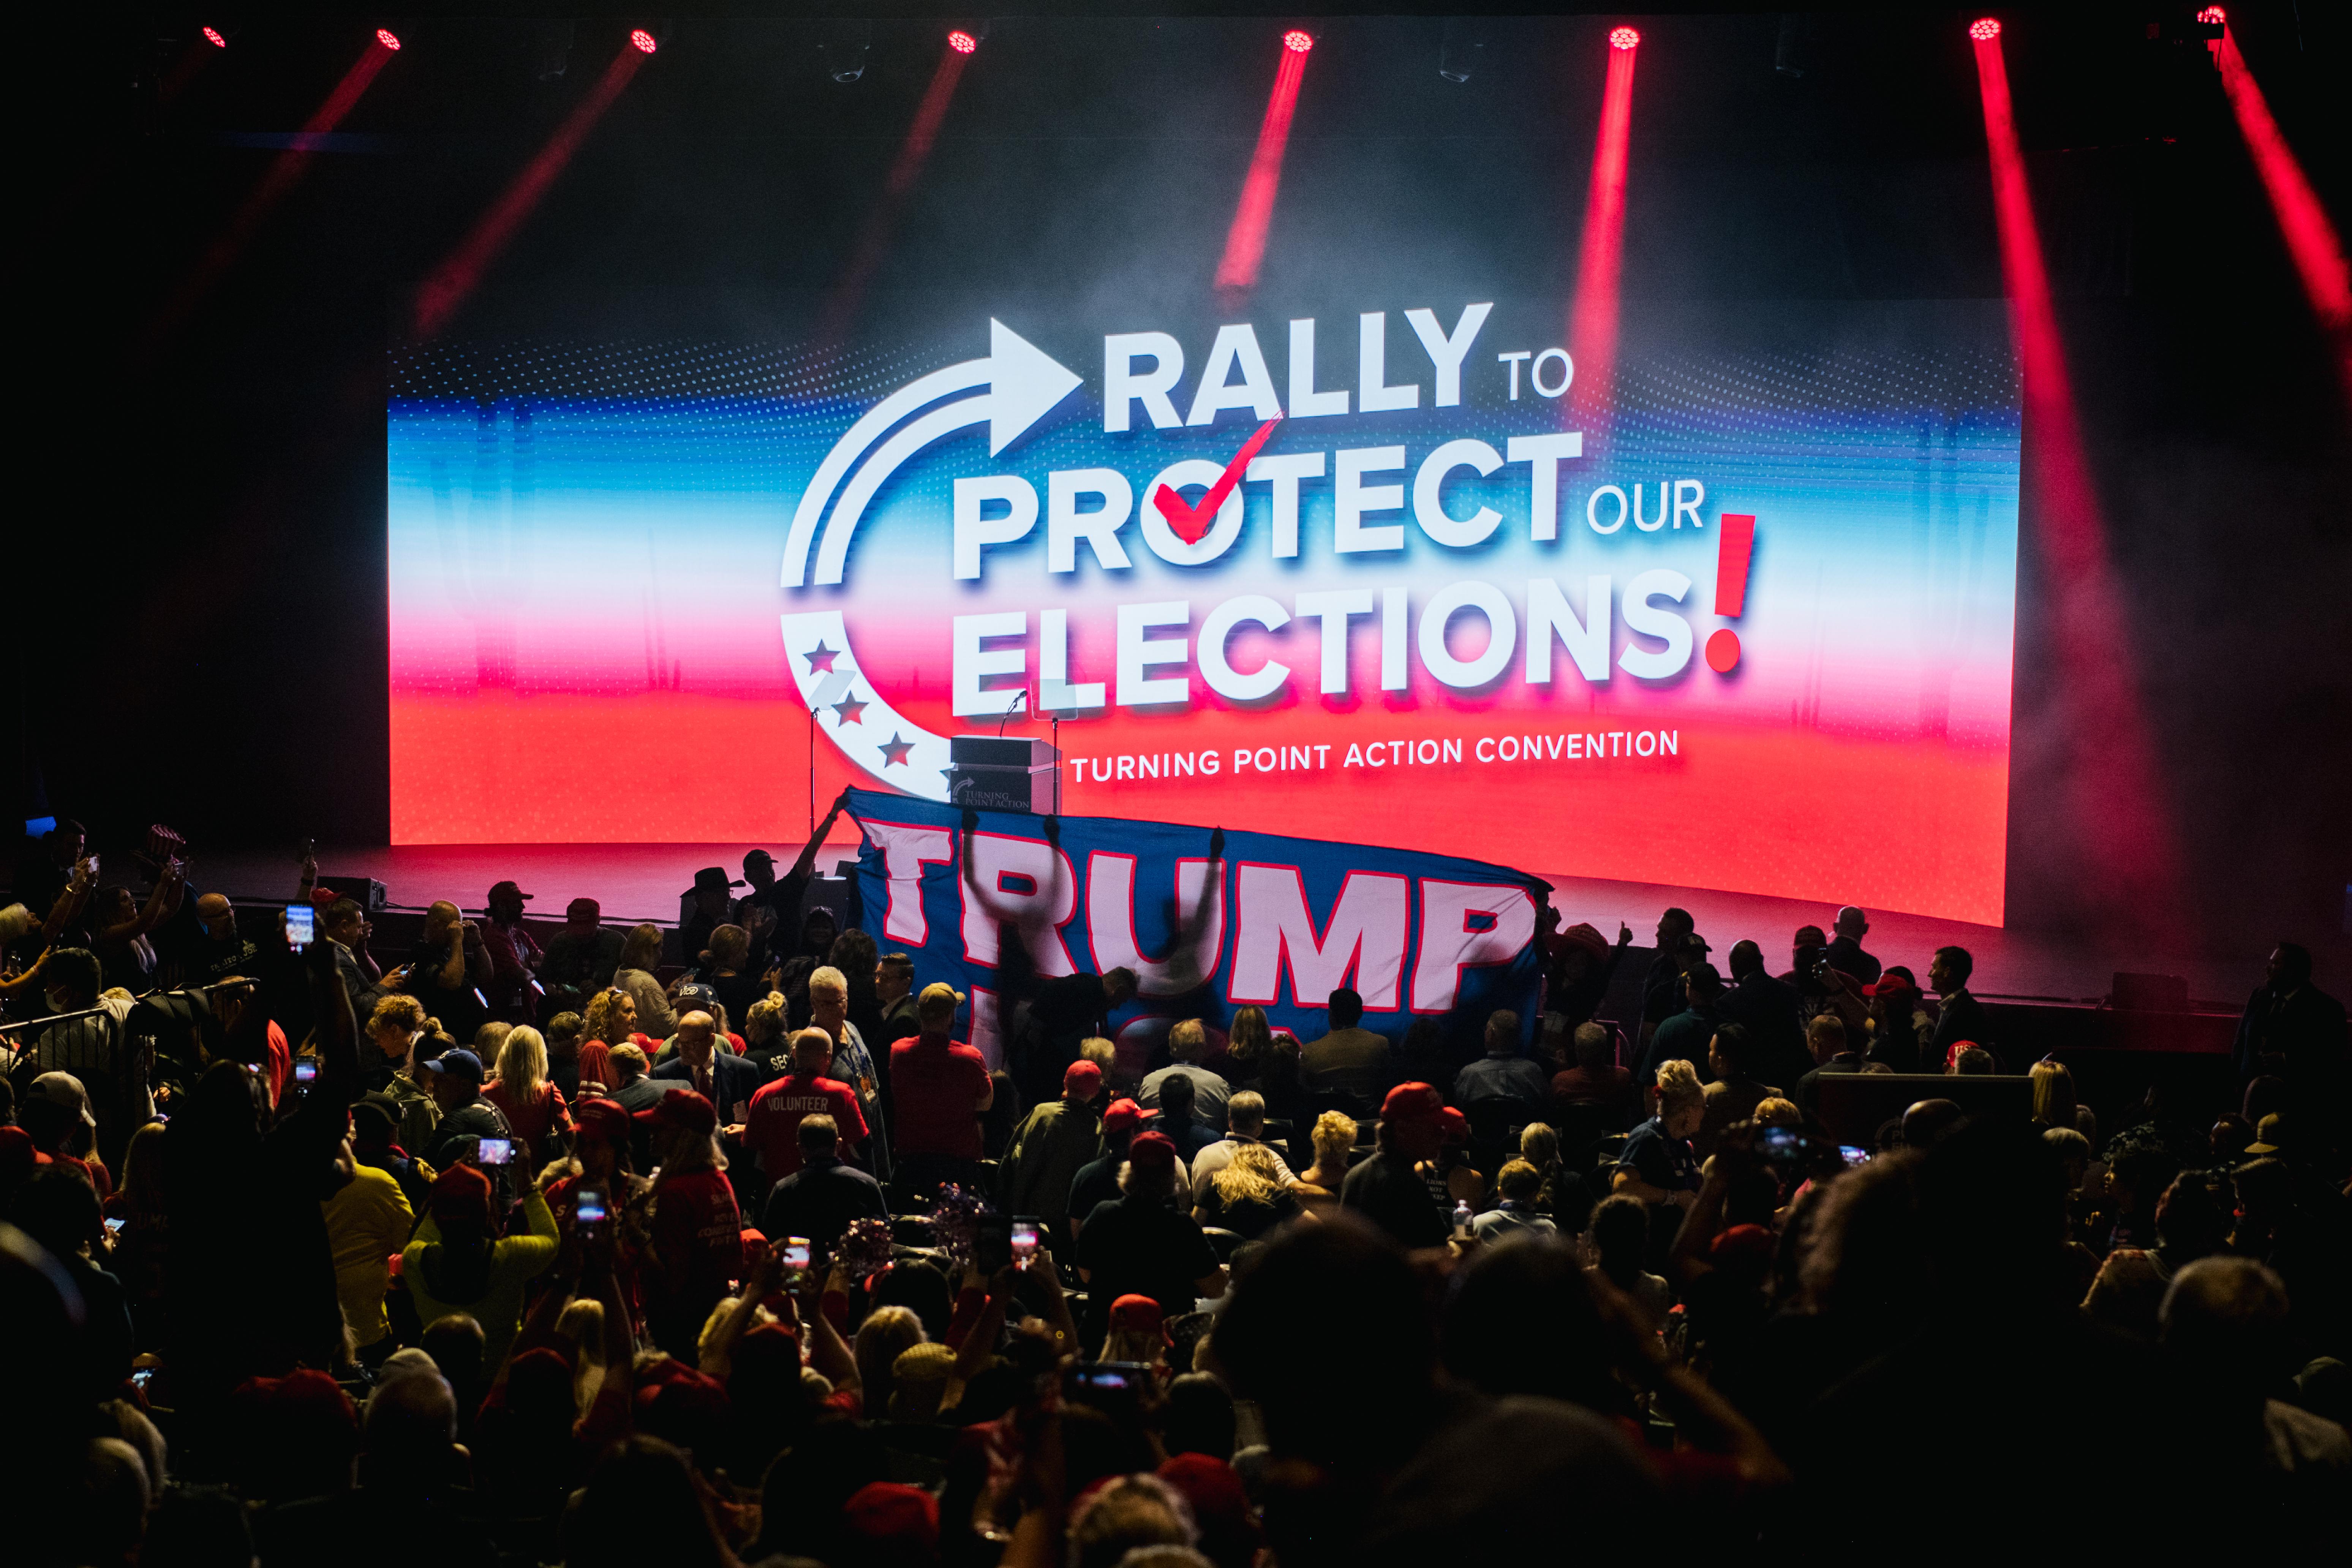 Many people seated in an auditorium indoors. On the stage is a Trump sign and a screen that says "Rally to Protect Our Elections Turning Point Action Convention."